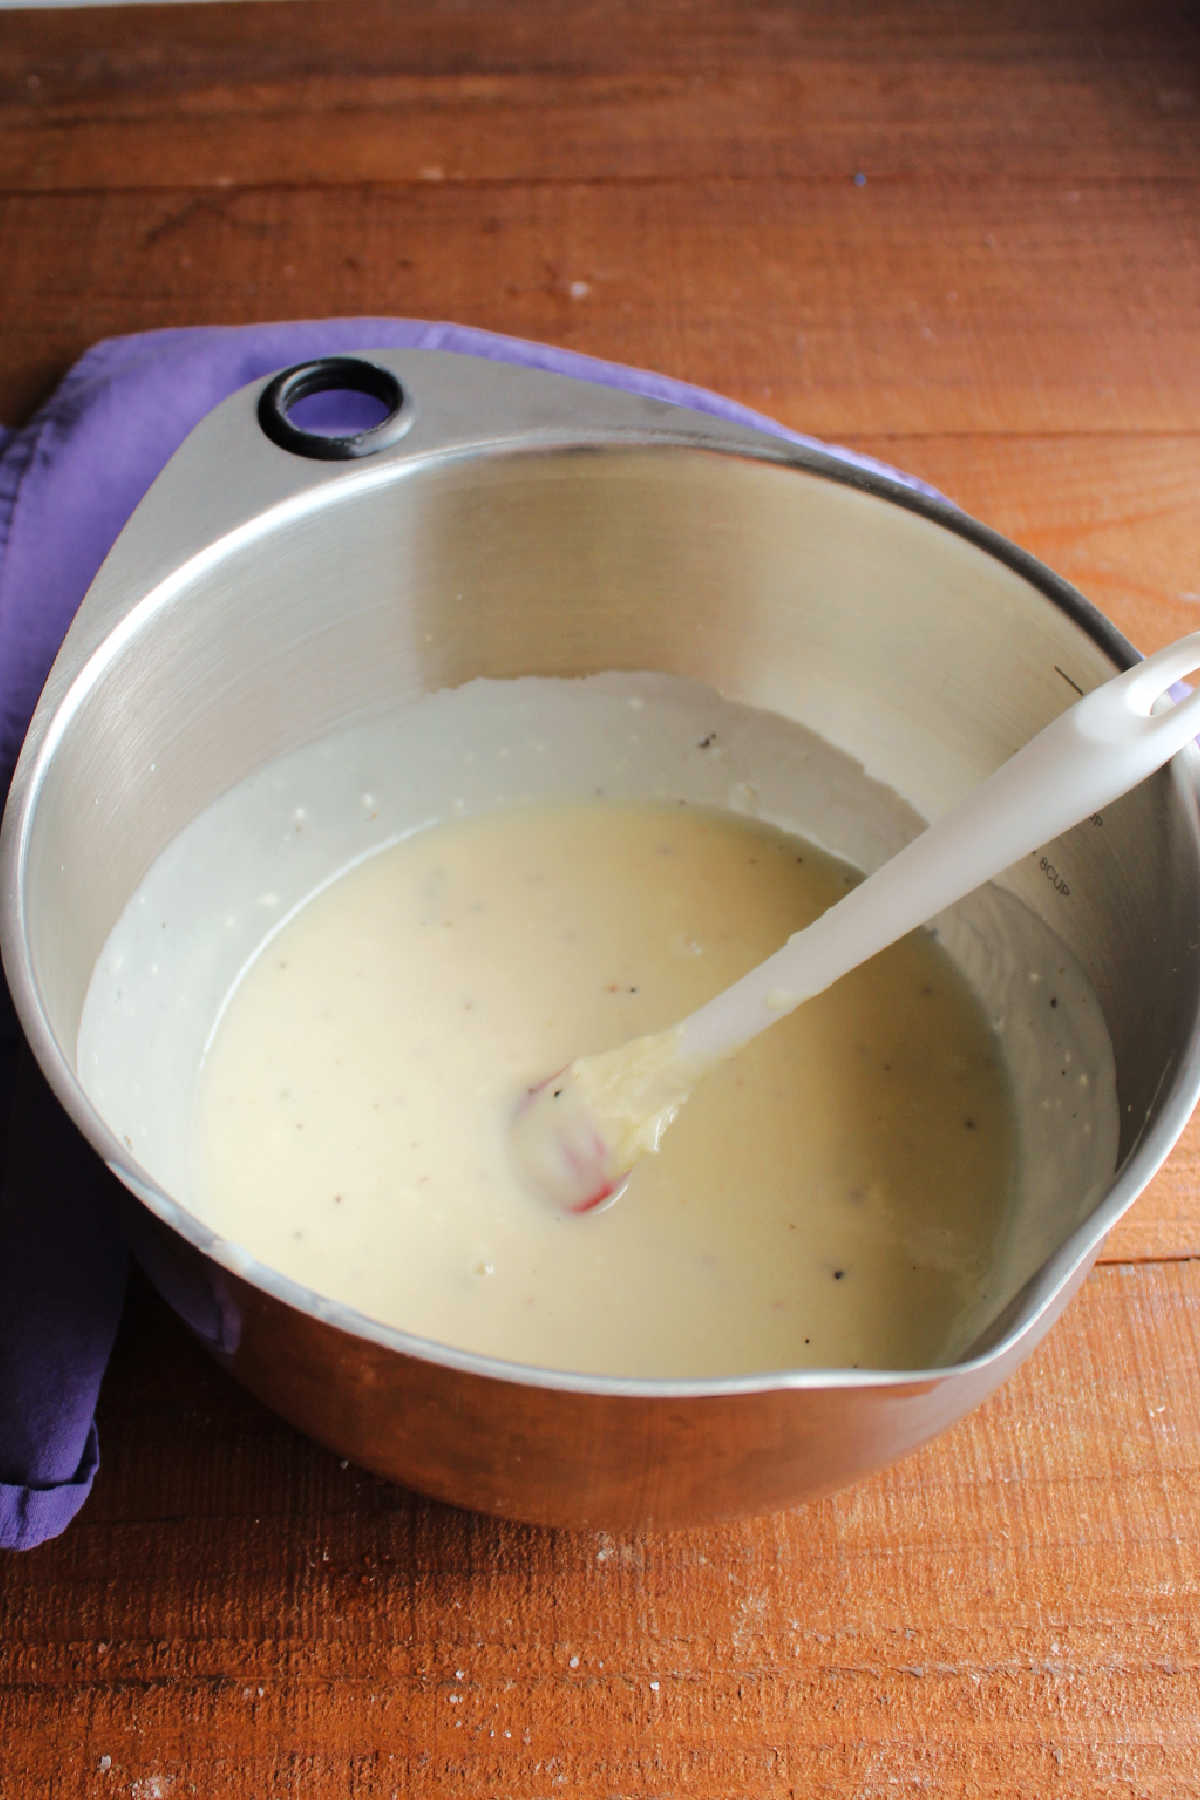 Large mixing bowl with creamy dressing made from condensed milk, mayonnaise, vinegar, sugar, salt and pepper.